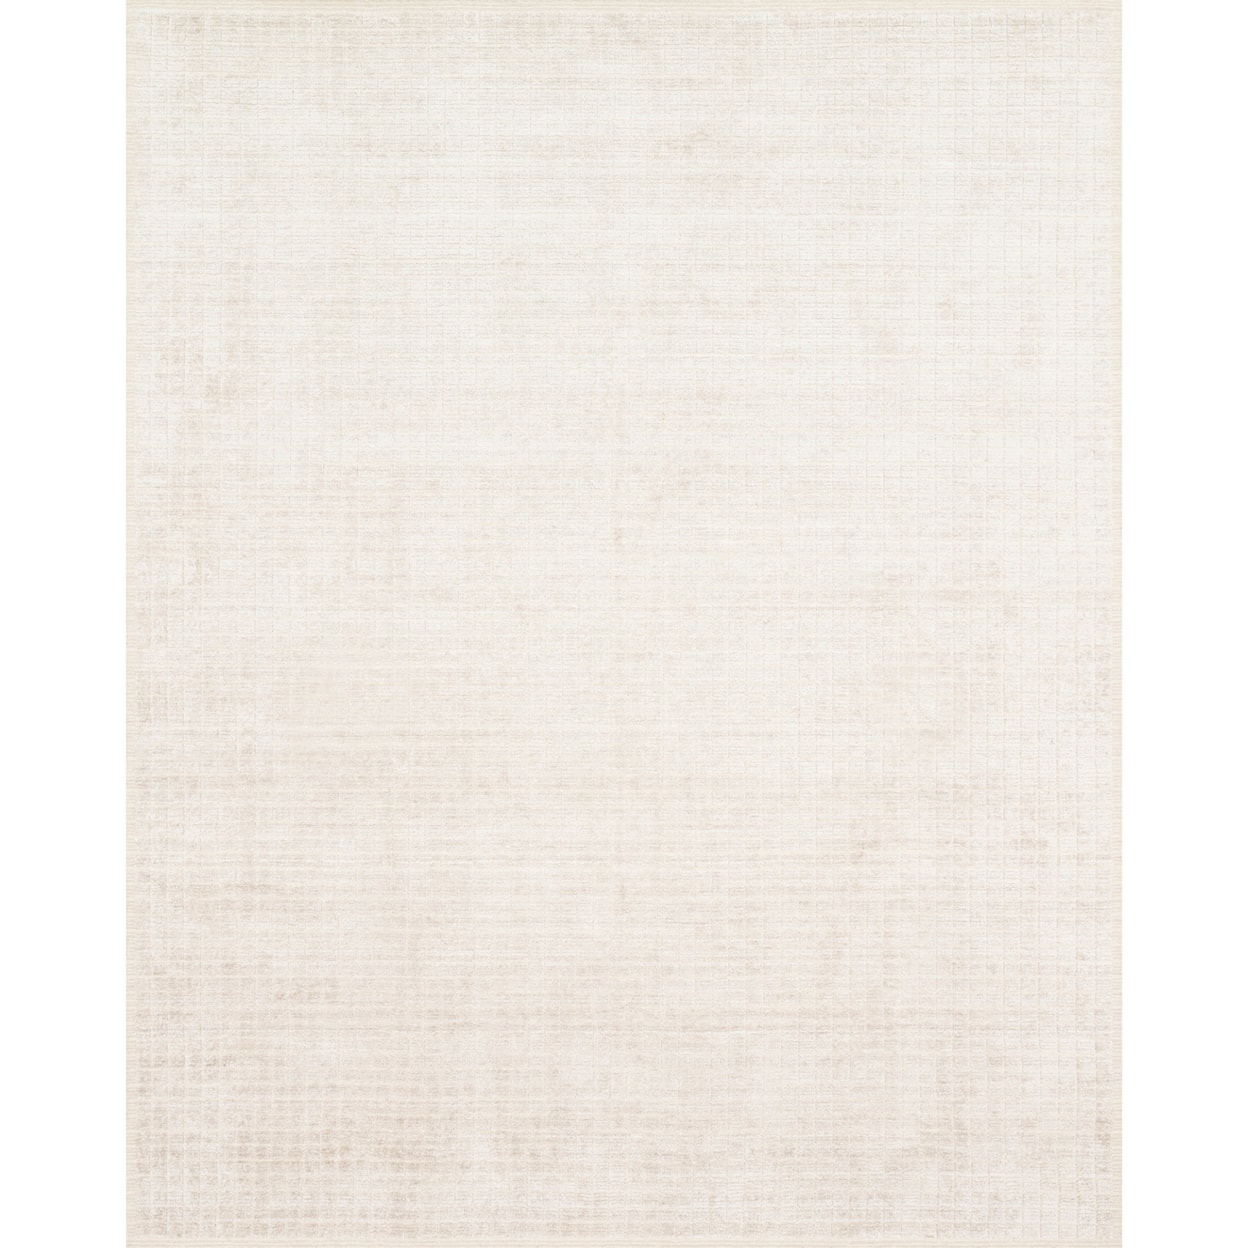 Reeds Rugs Beverly 8'6" x 11'6" Natural Rug